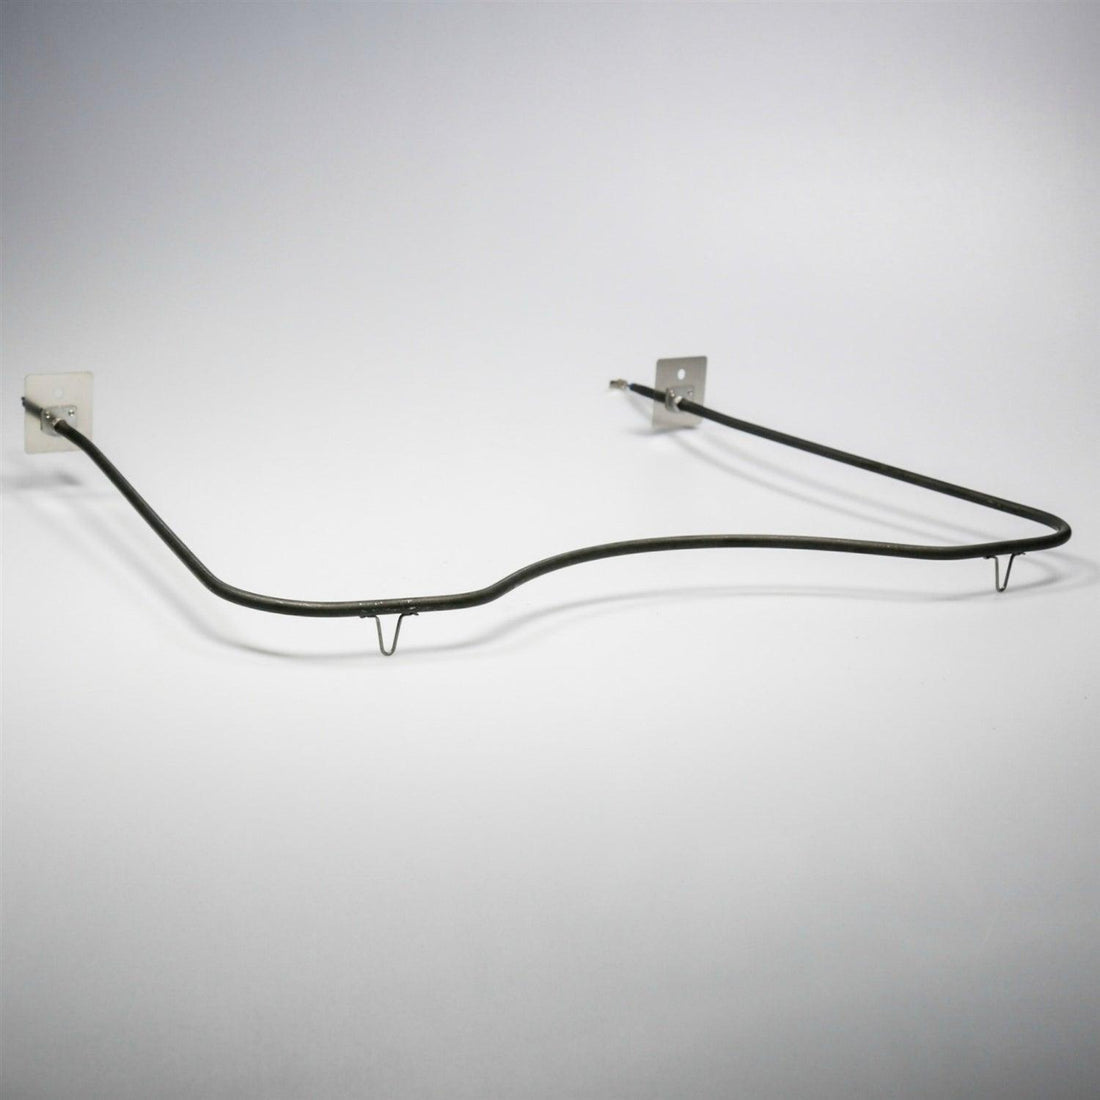 Whirlpool Maytag Oven Bake Element 326793